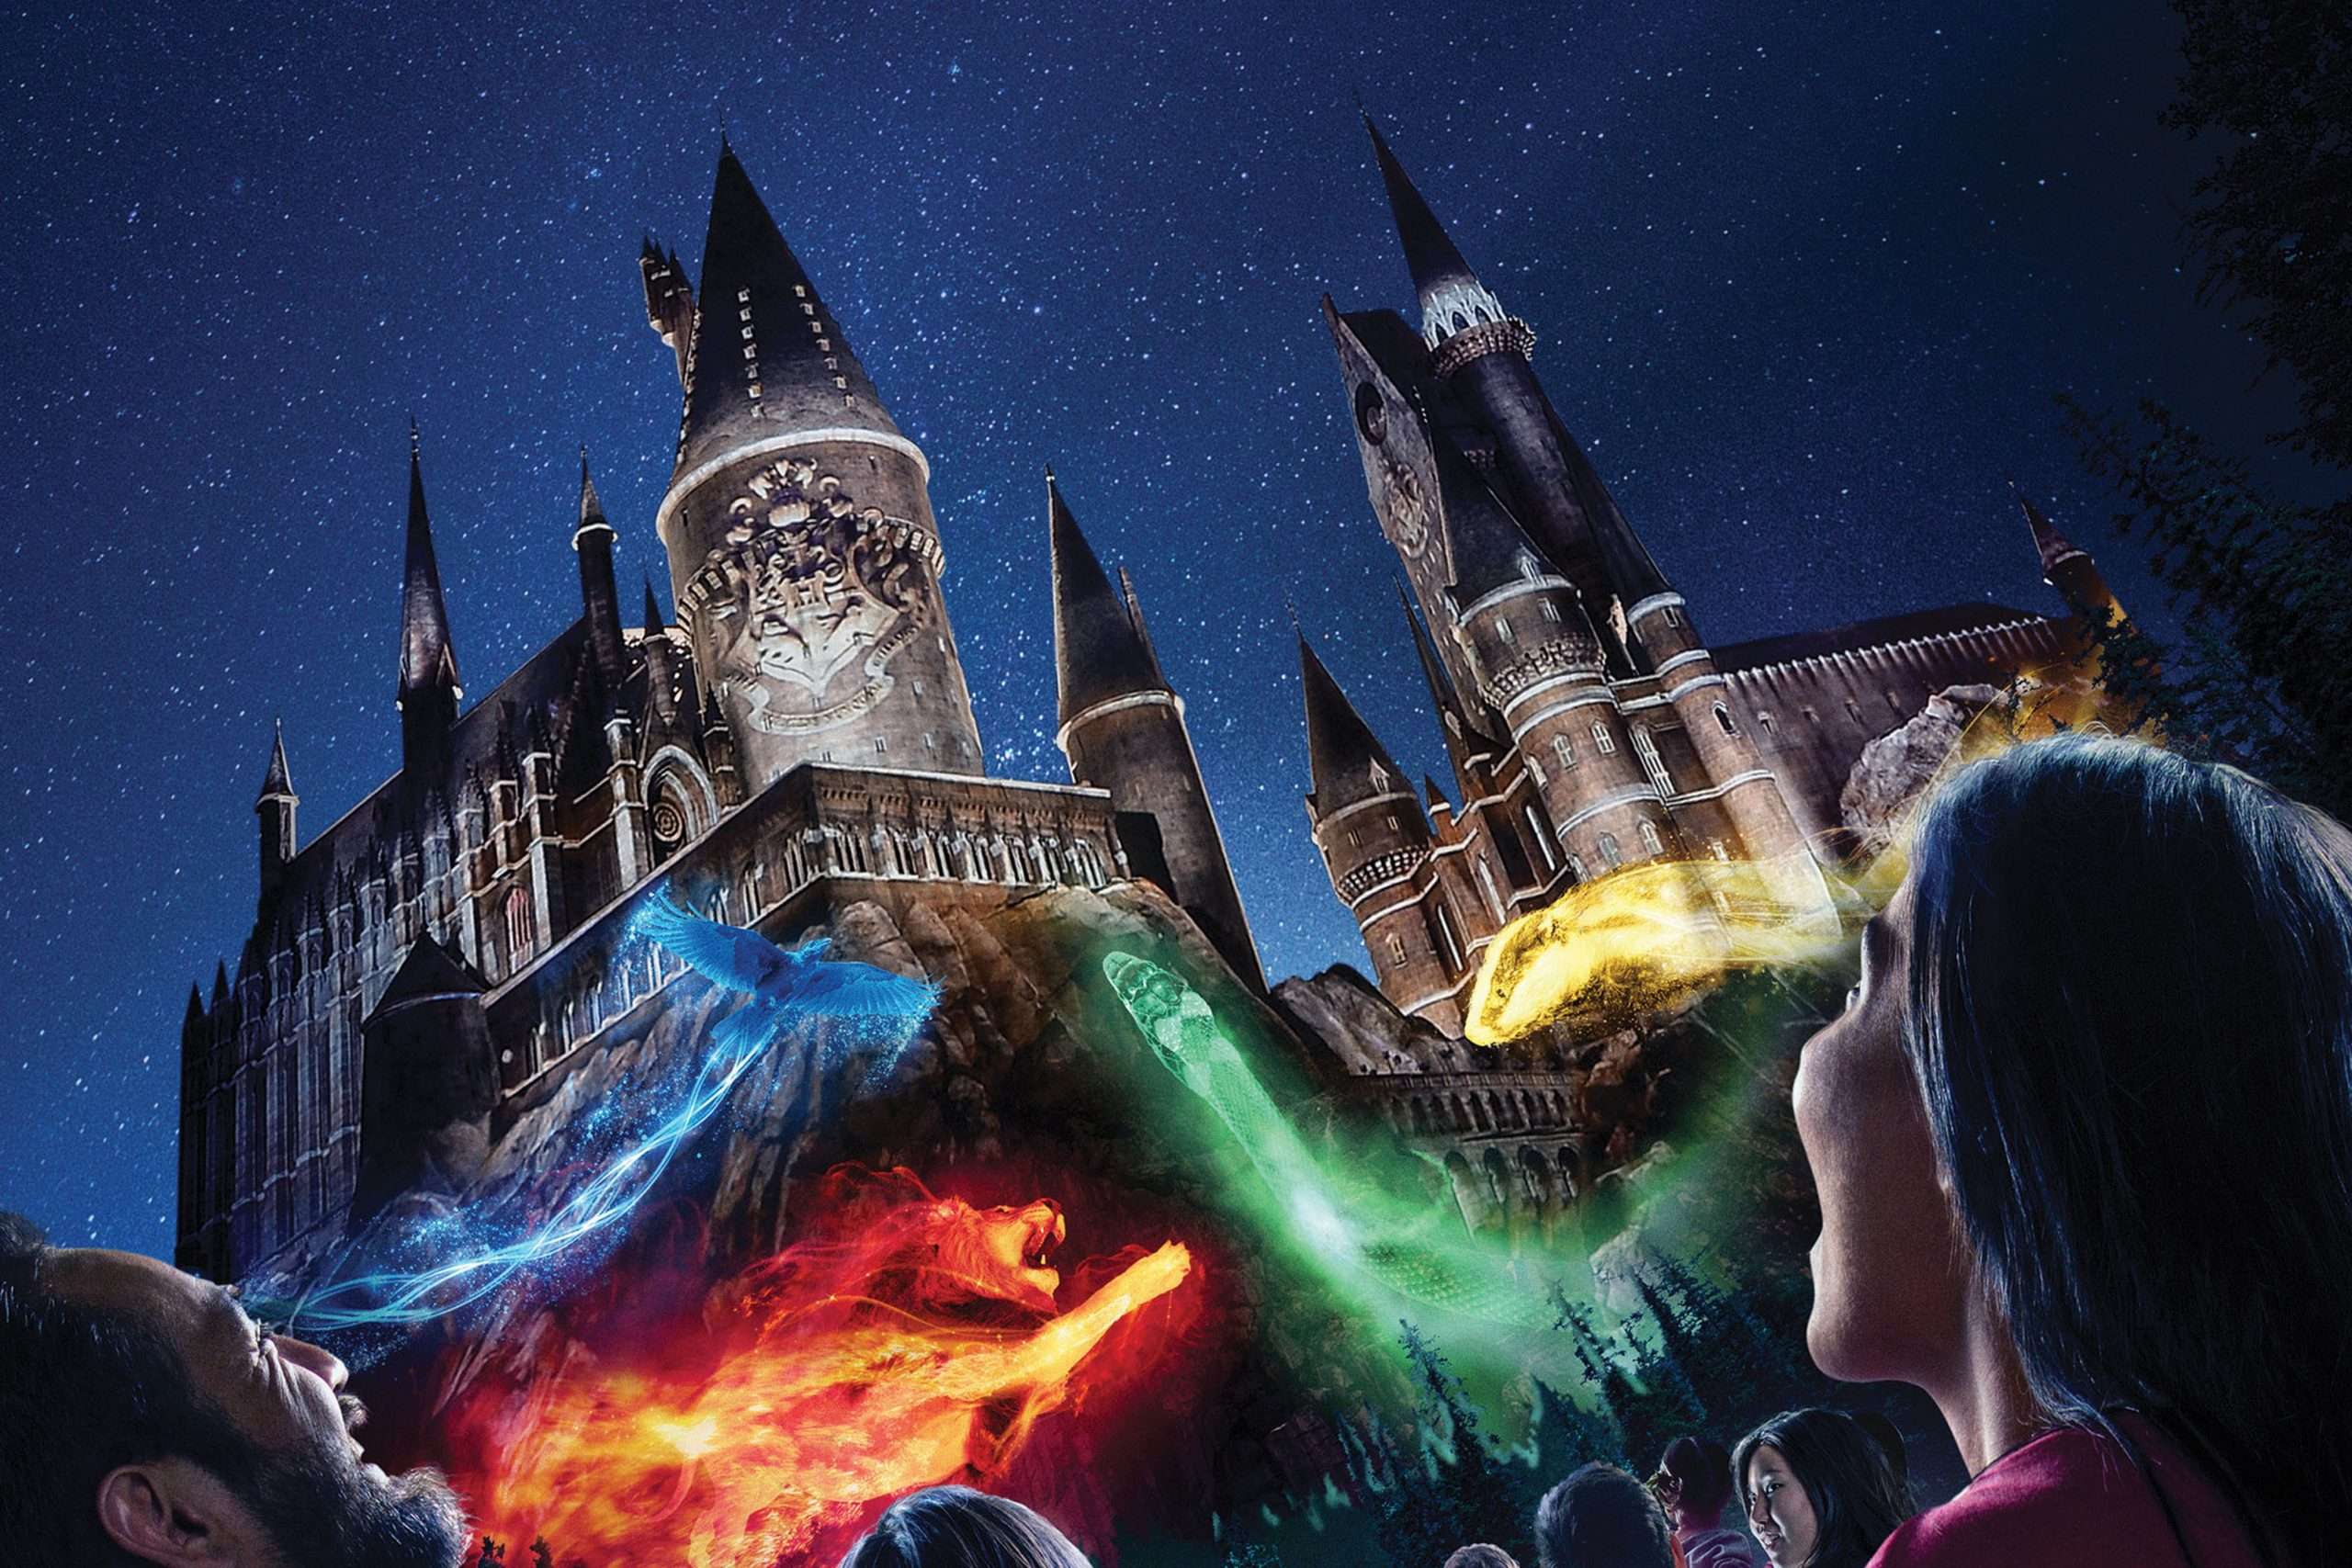 âThe Nighttime Lights at Hogwarts Castleâ? to premiere June 23 at ...